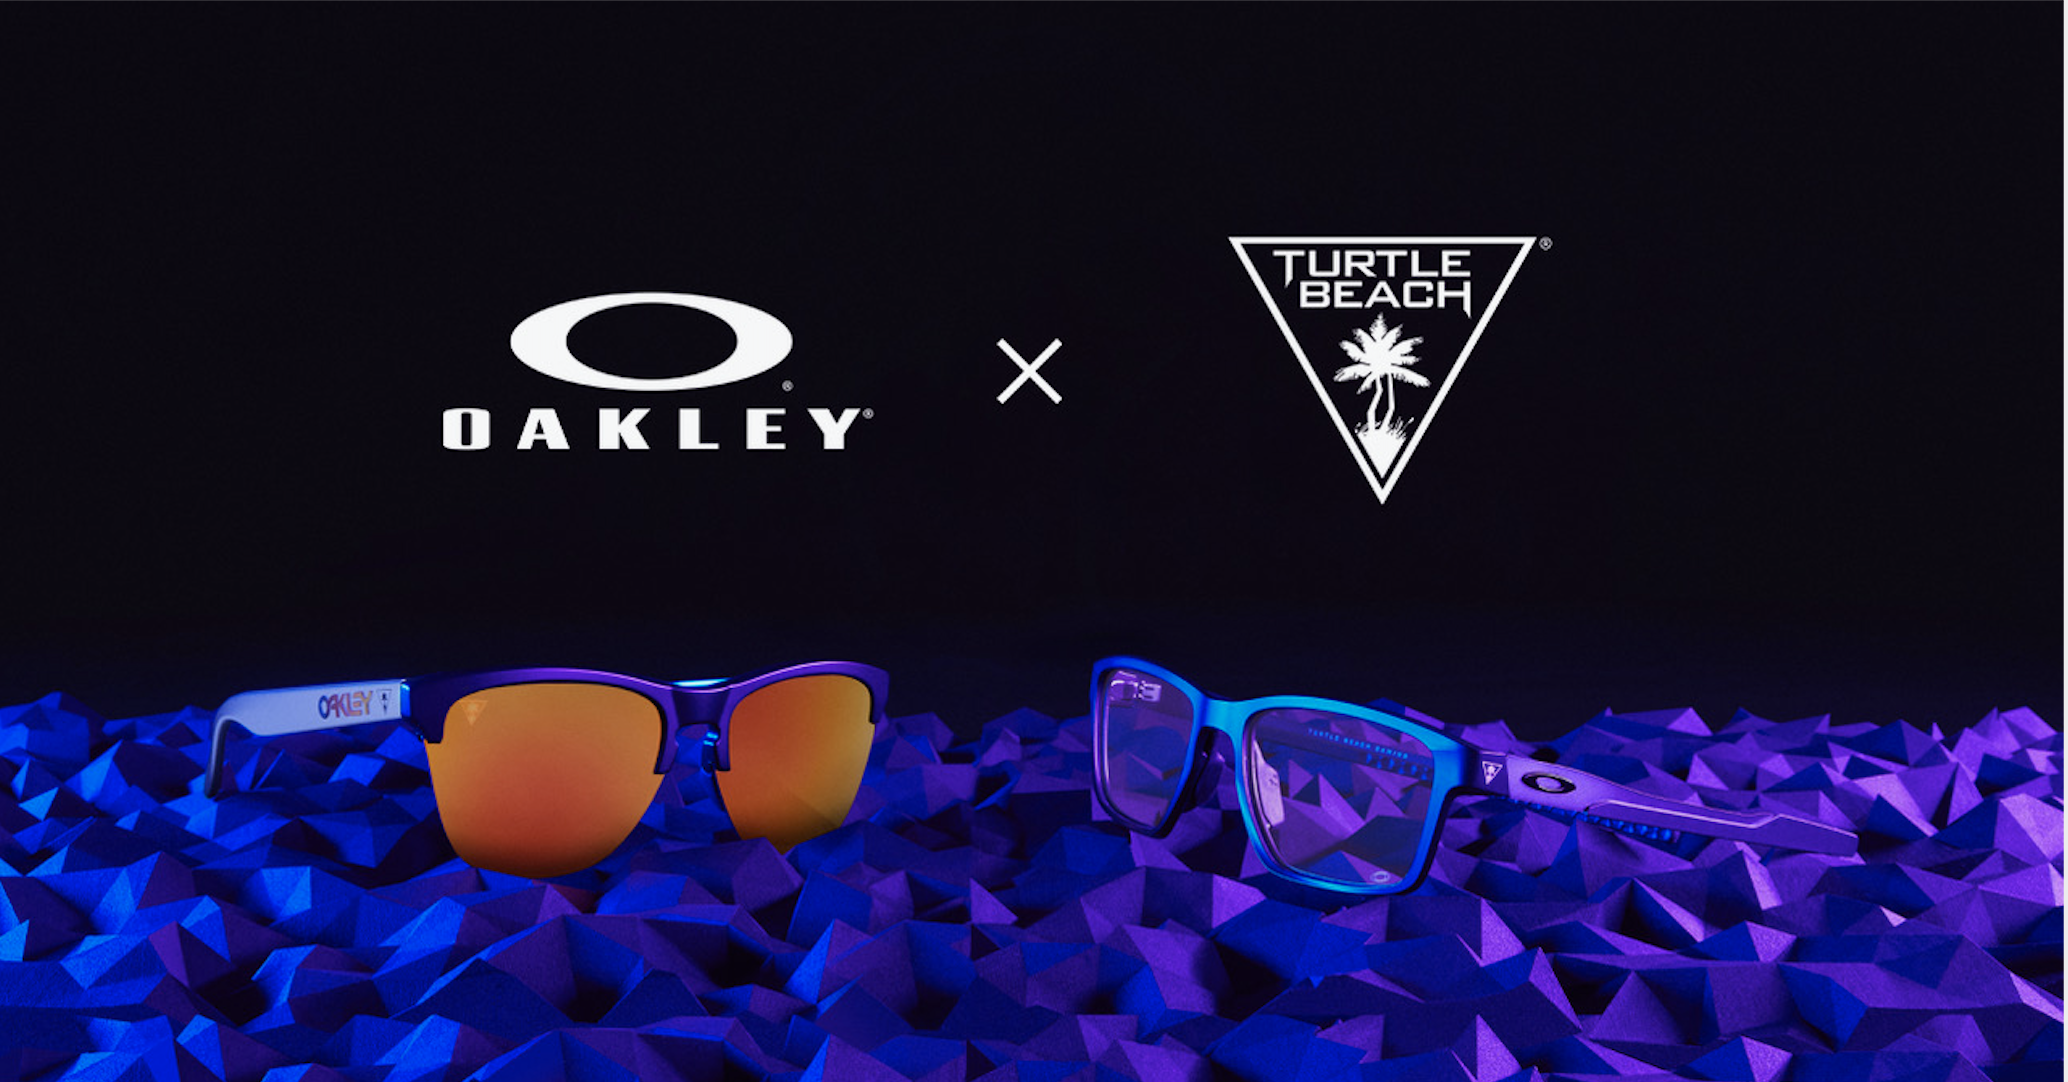 See better. Hear better. Play better. Oakley teams up with Turtle Beach to give gamers the ultimate advantage